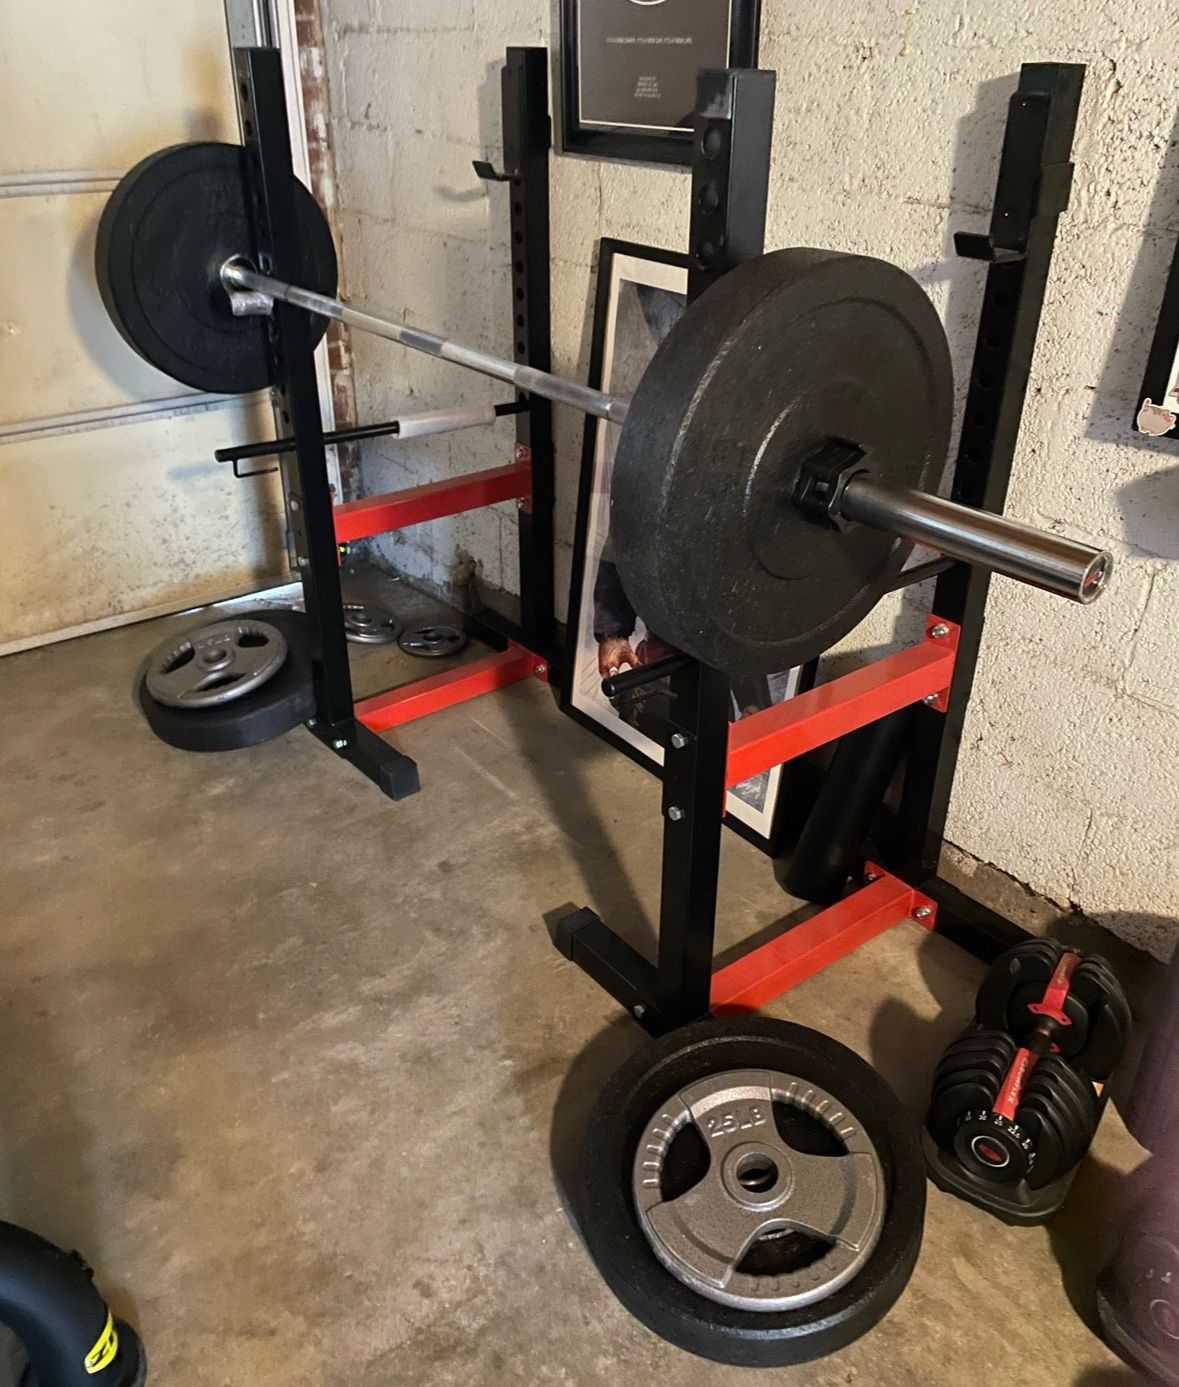 Squat Rack Barbell Weights Wrestling mats Rower Misc